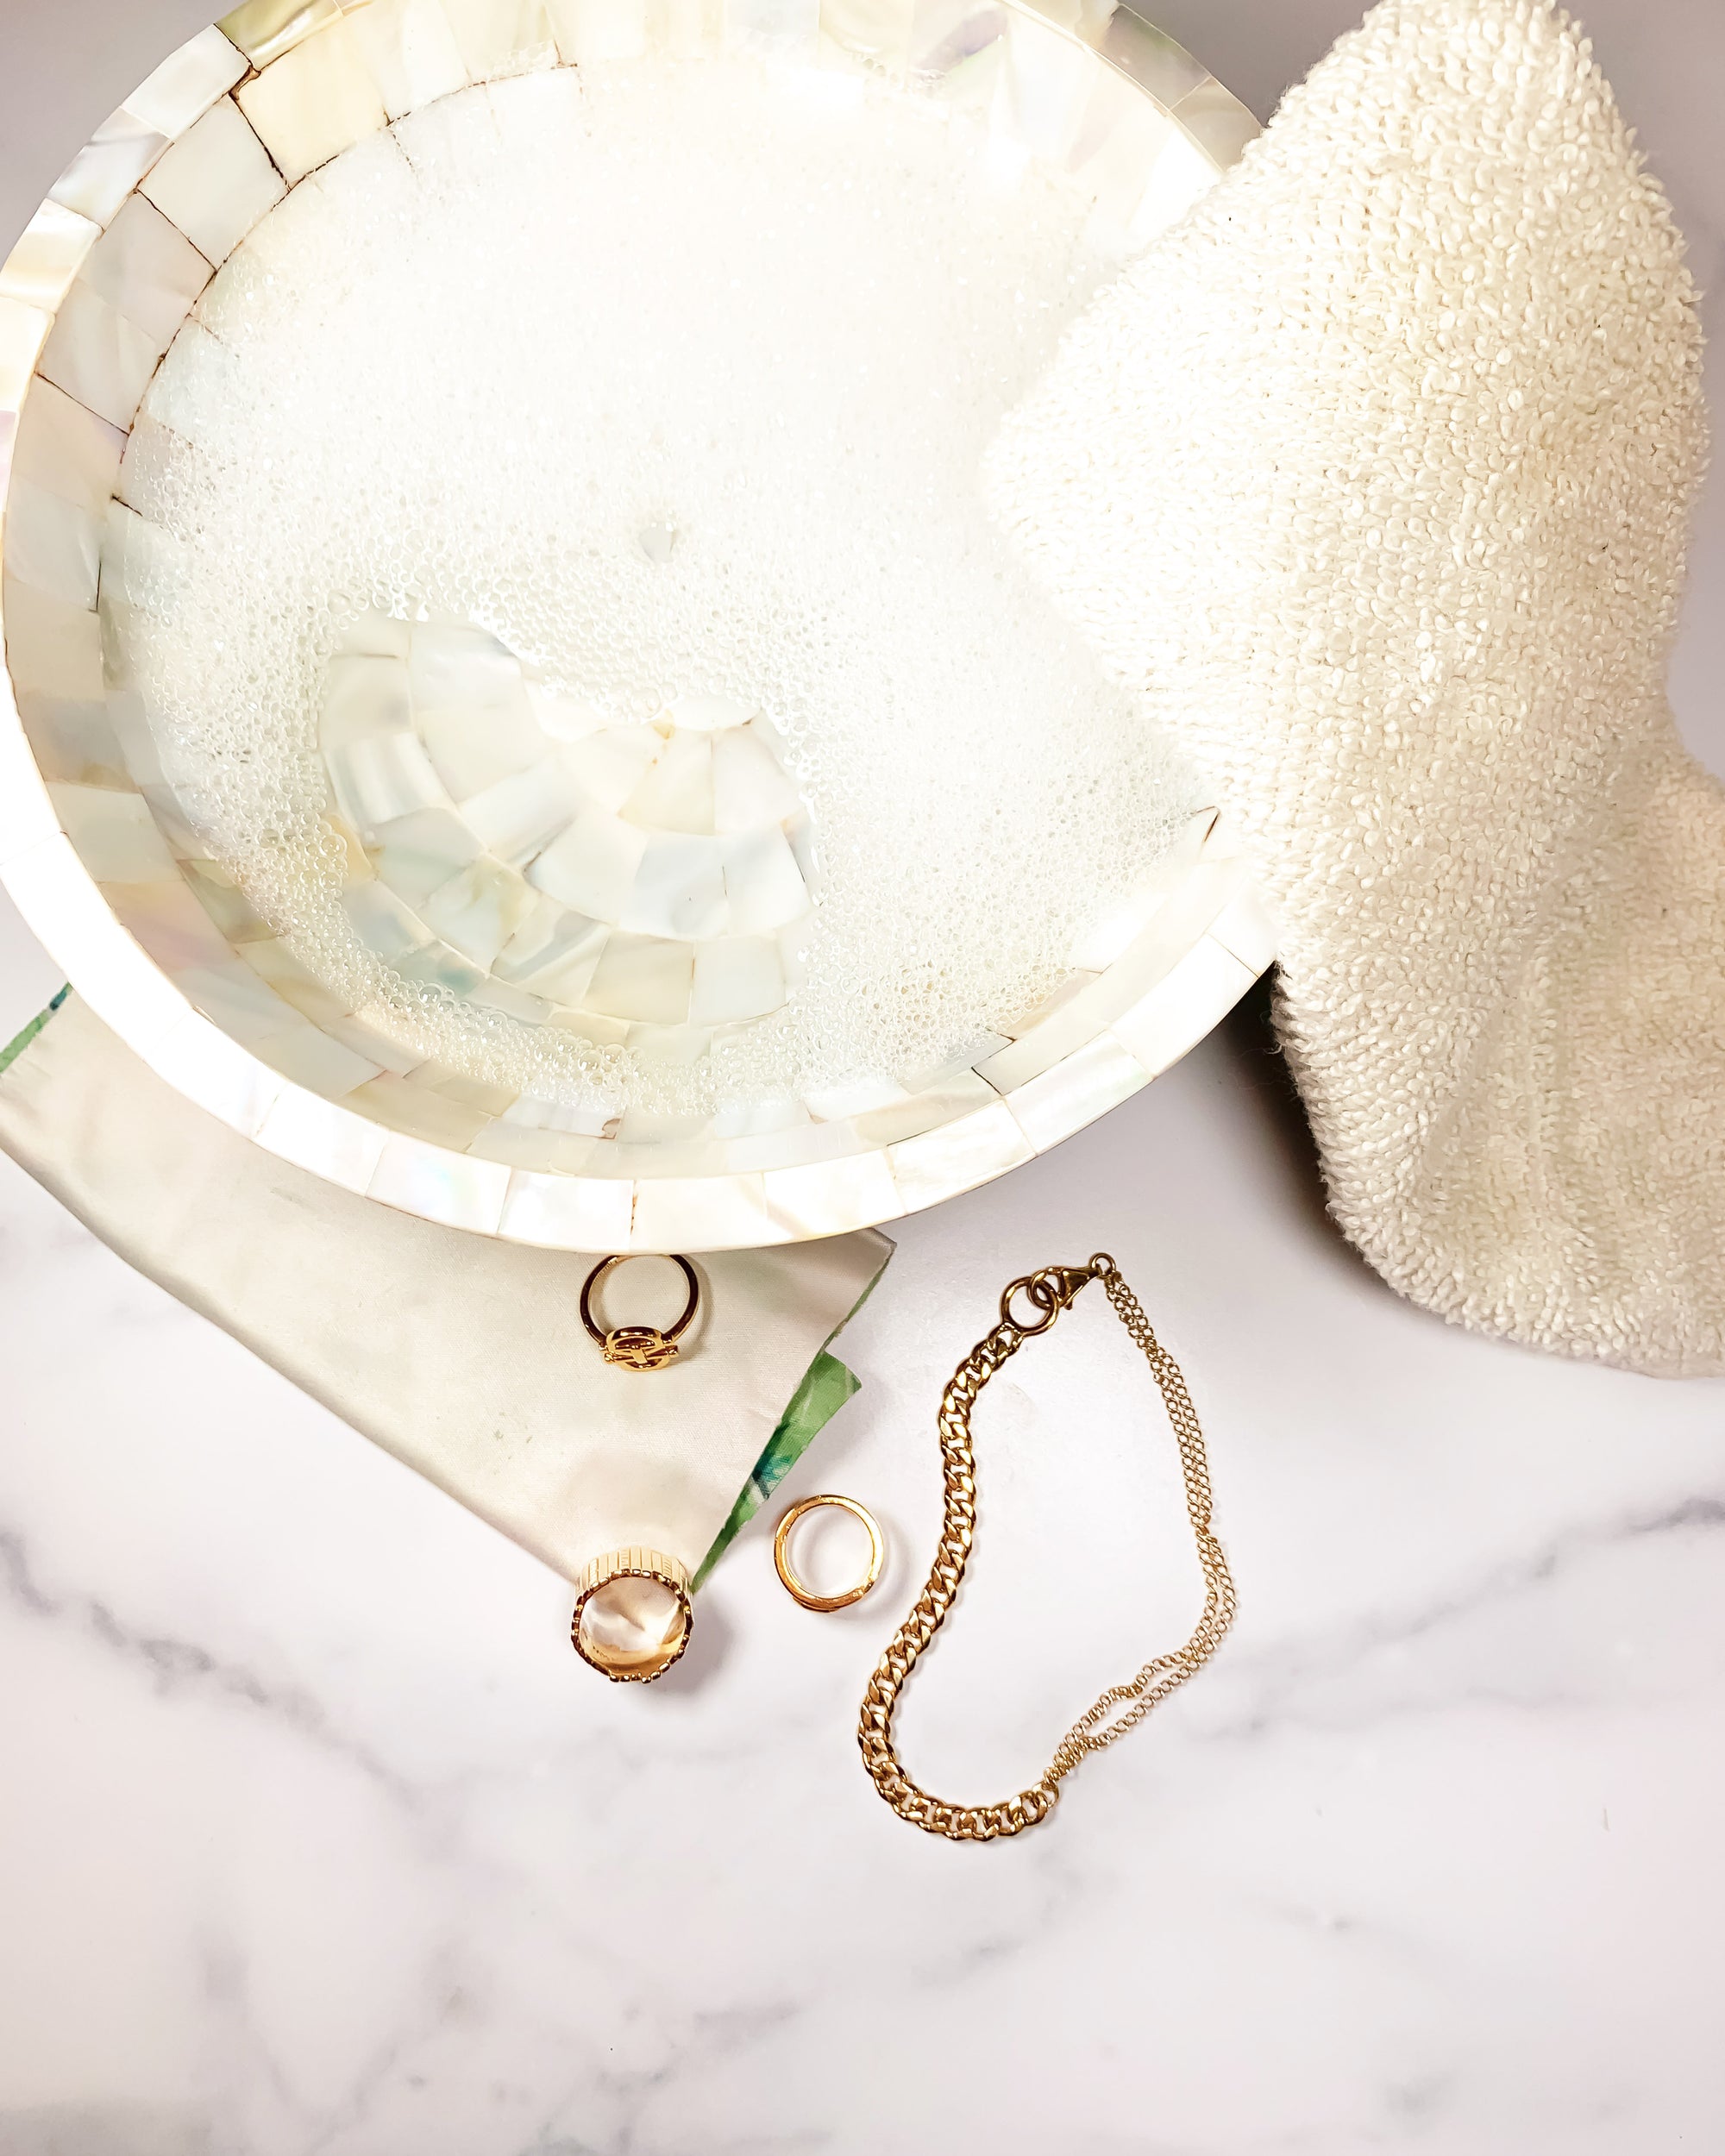 How to Clean Gold Vermeil Jewelry - an easy guide